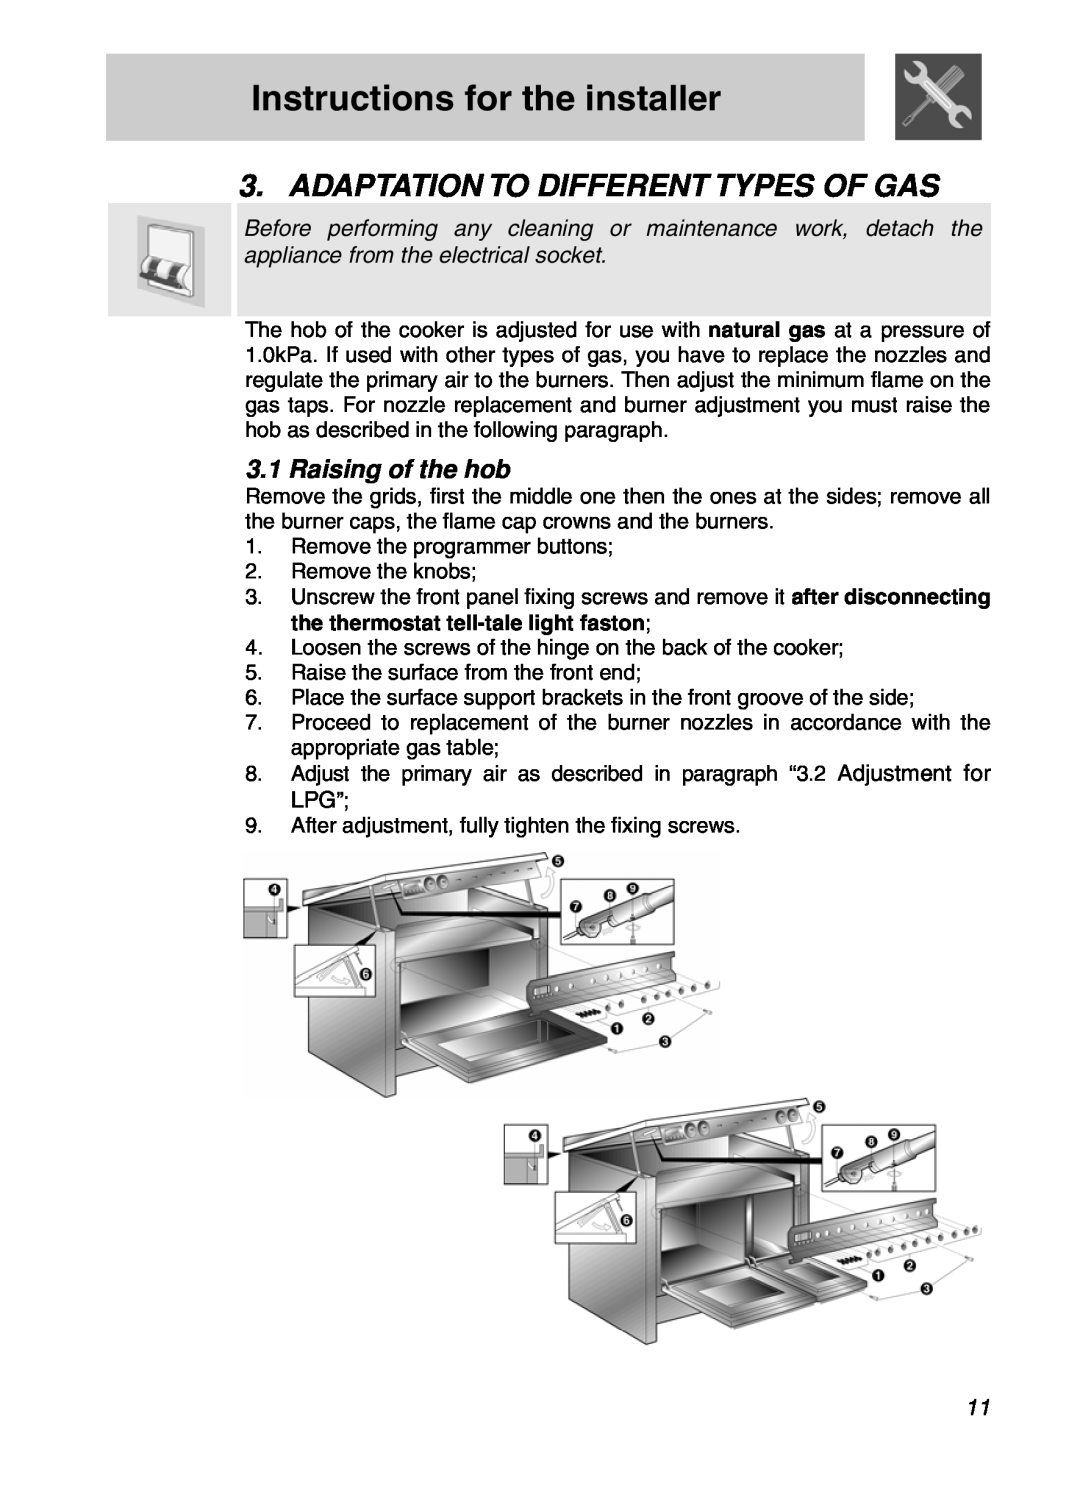 Smeg CSA19ID-6 manual Adaptation To Different Types Of Gas, Raising of the hob, Instructions for the installer 